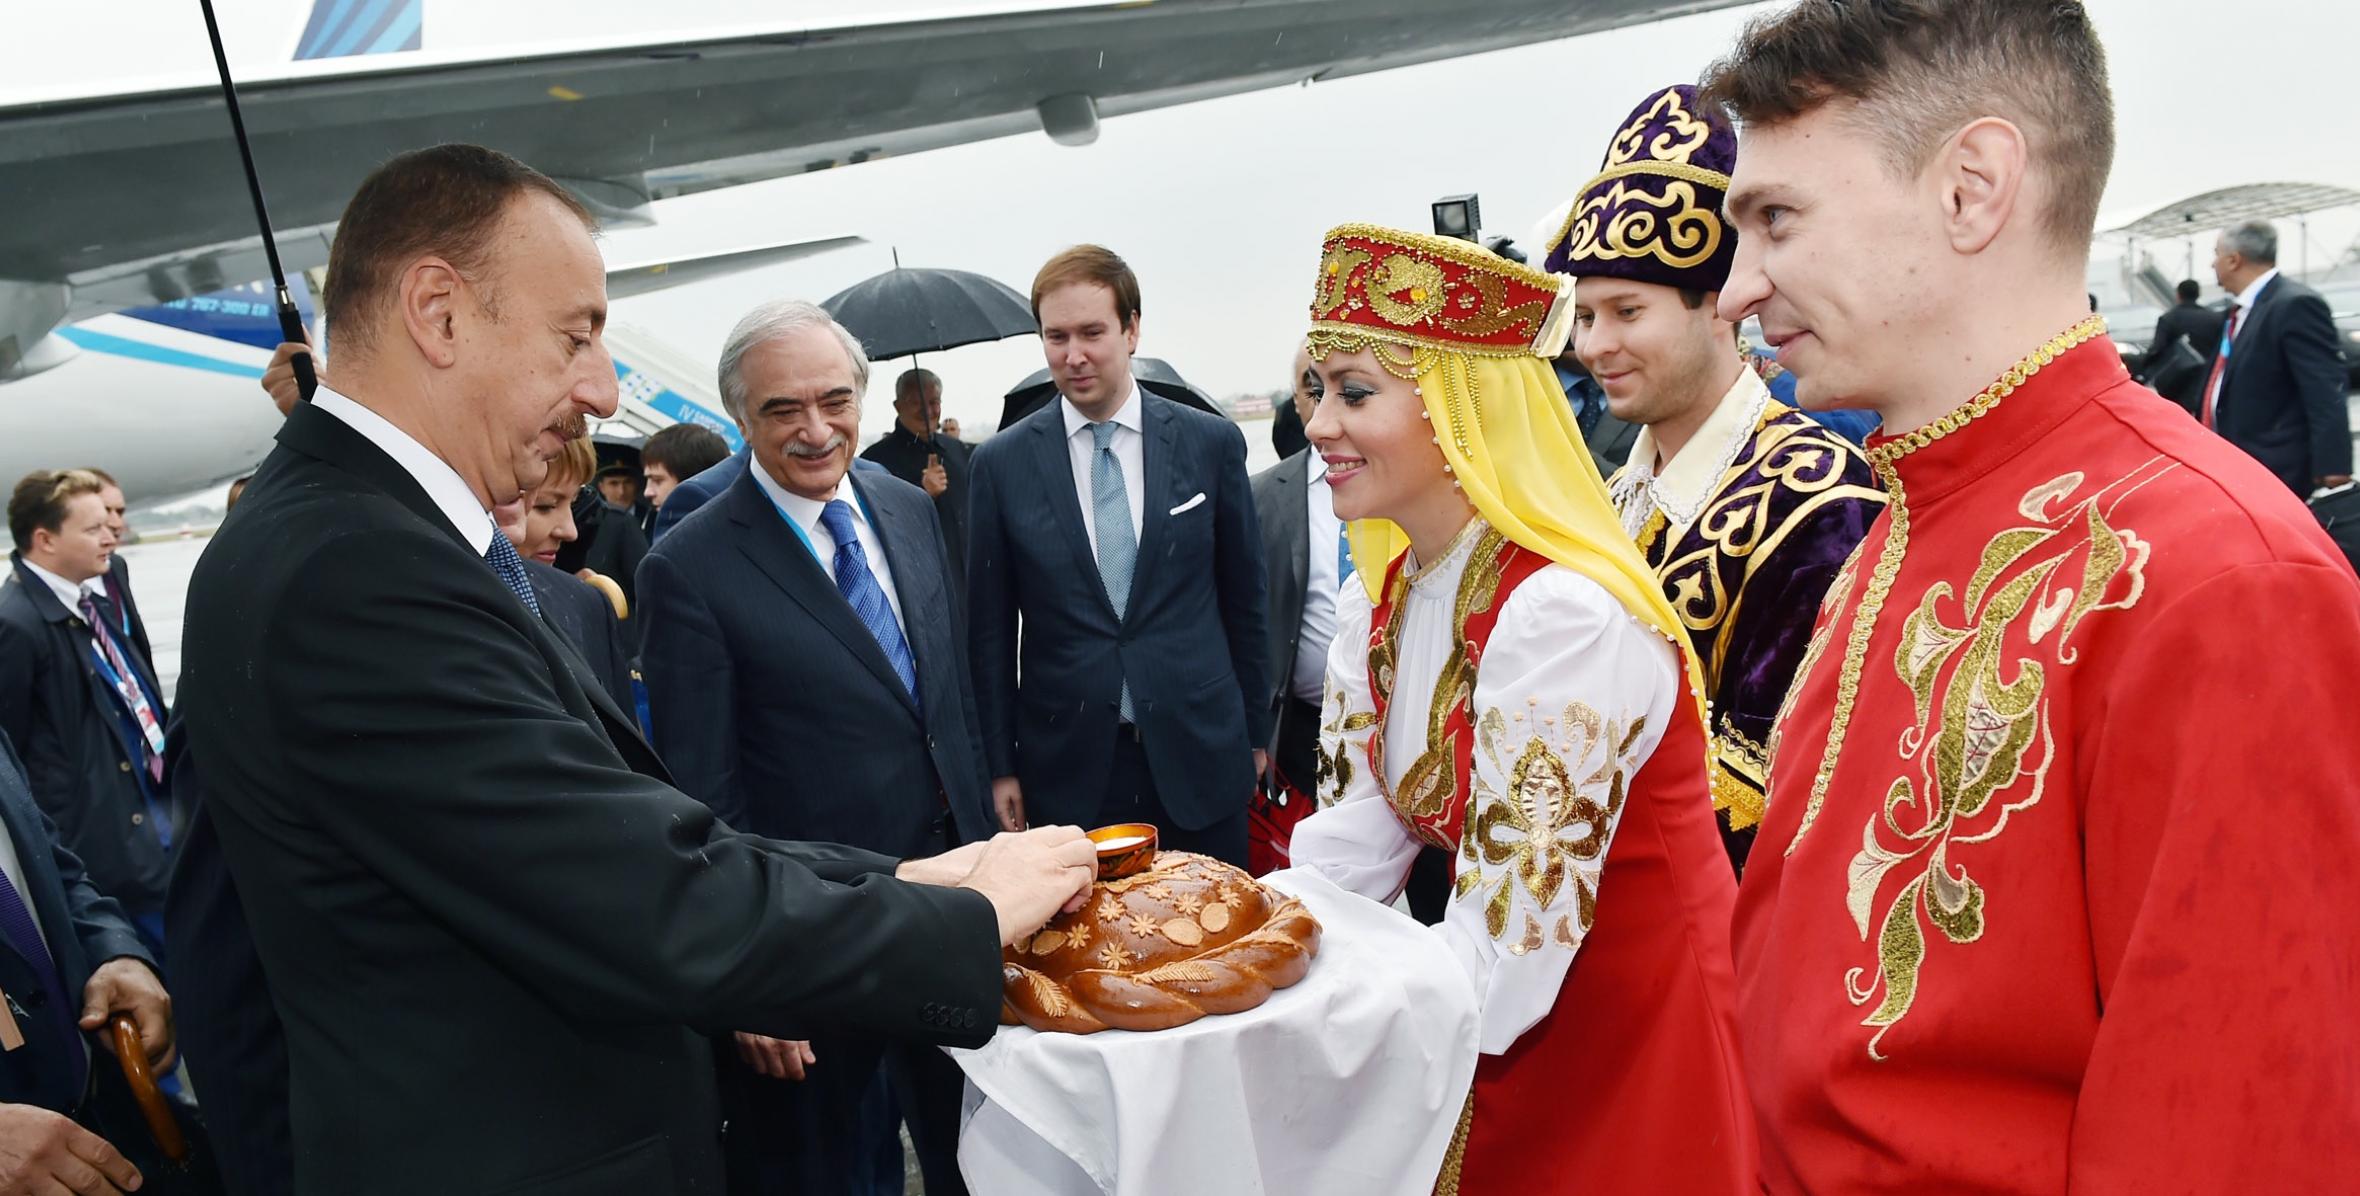 Ilham Aliyev arrived in Astrakhan on a working visit